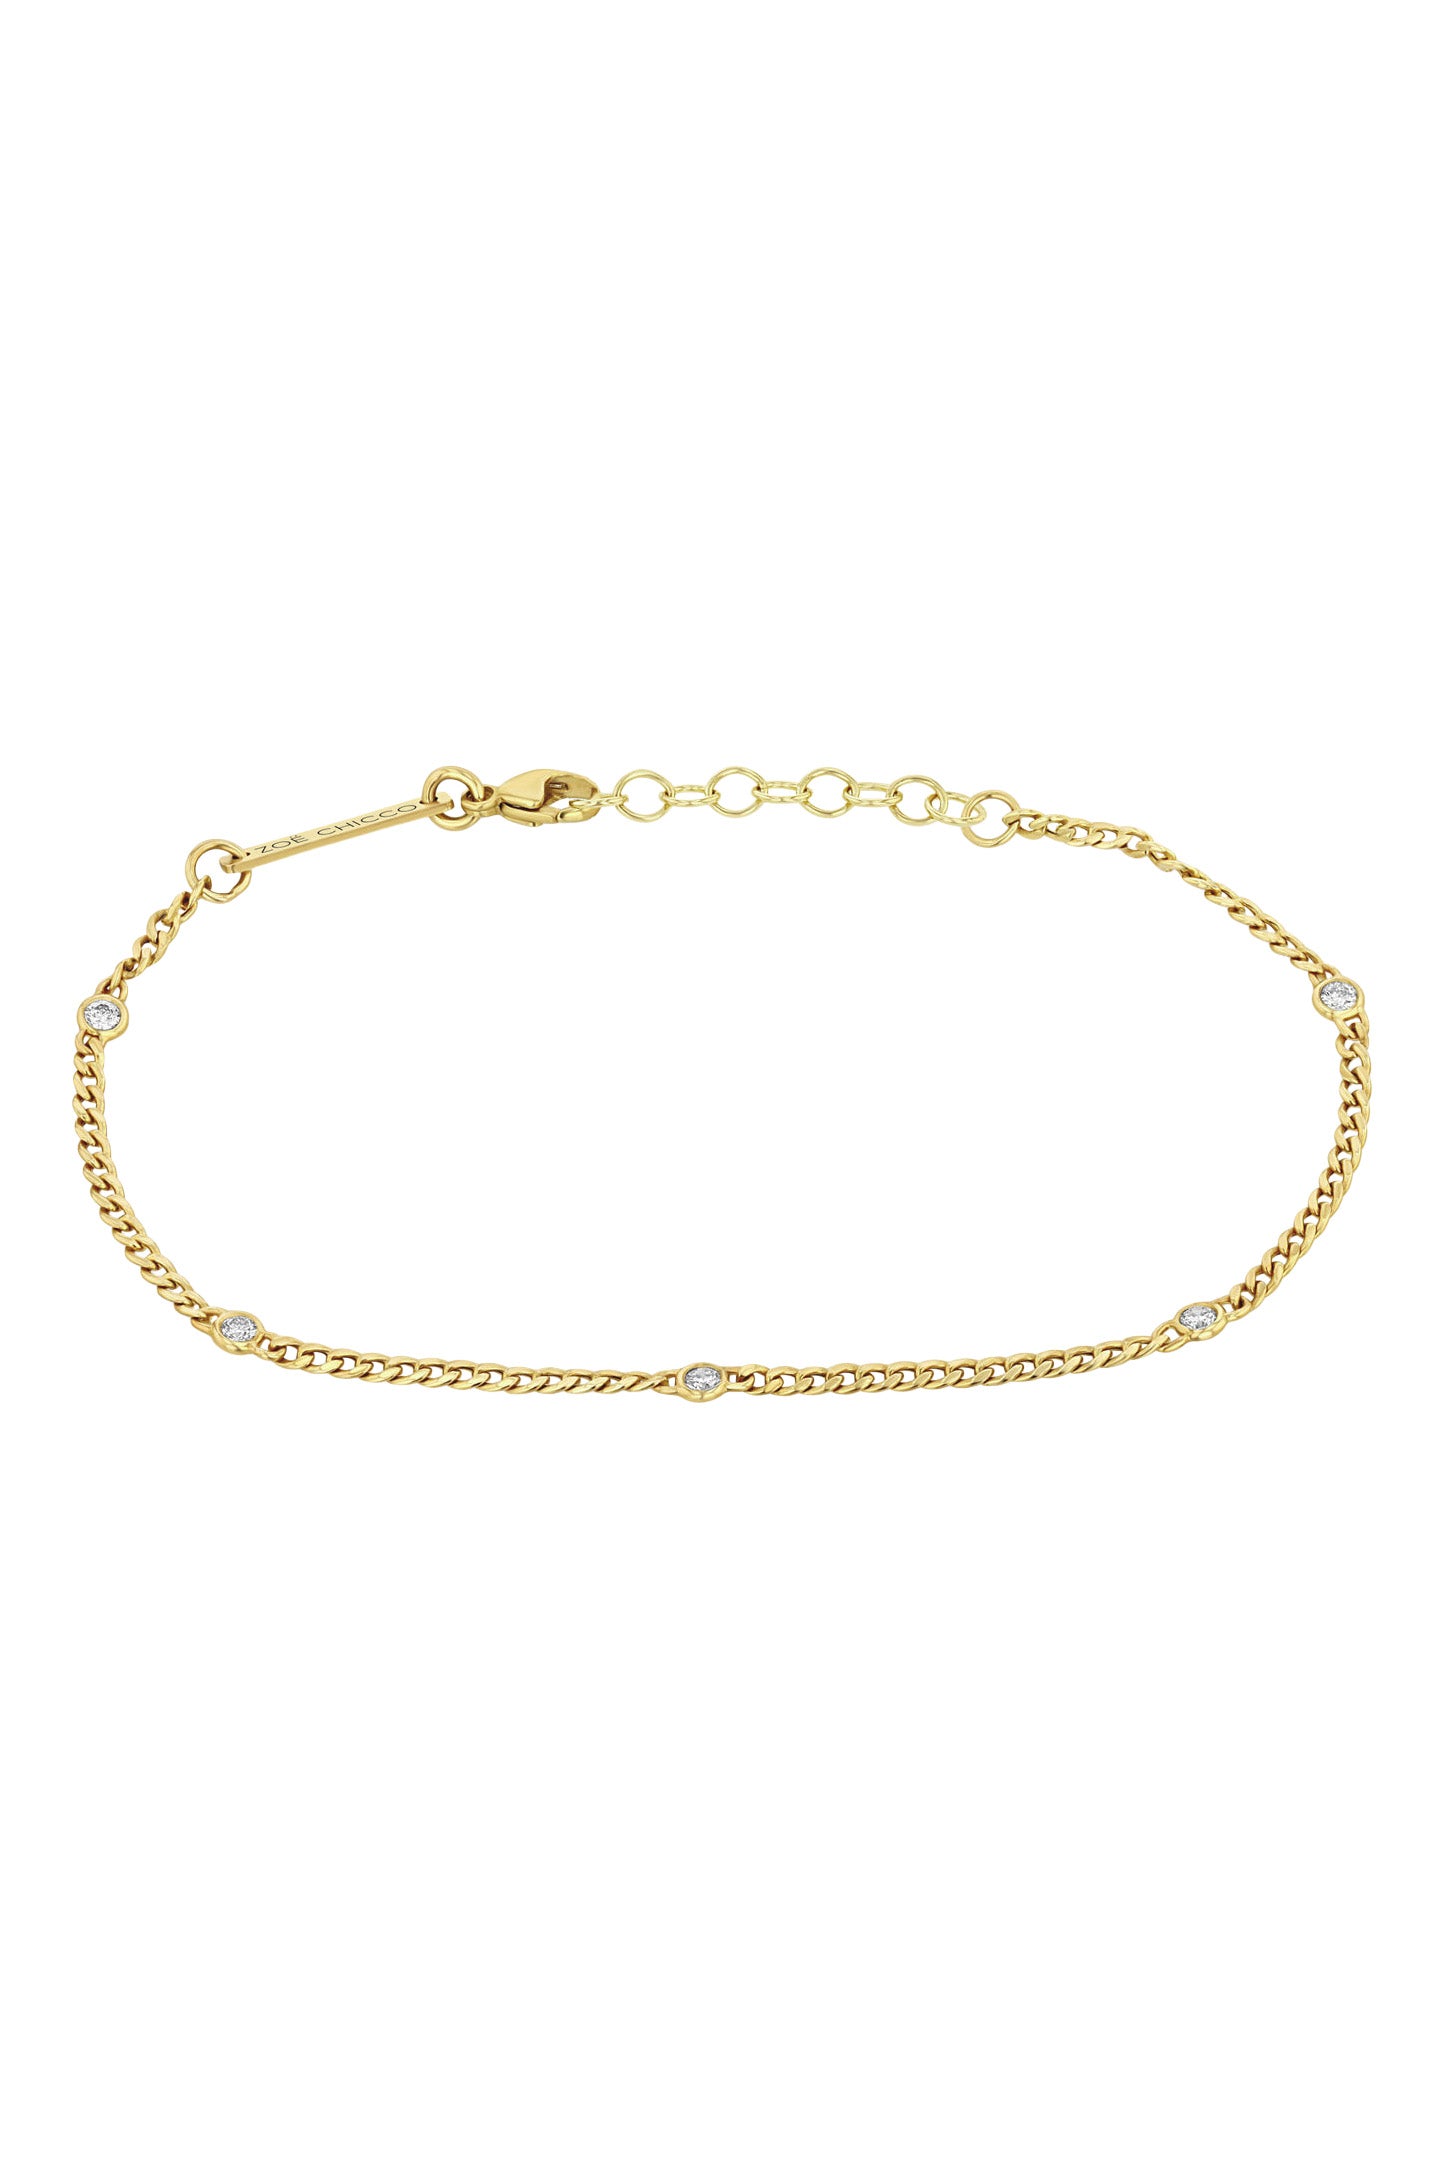 Zoe Chicco Extra Small Curb Chain Bracelet with 5 Floating Diamonds in 14k Yellow Gold